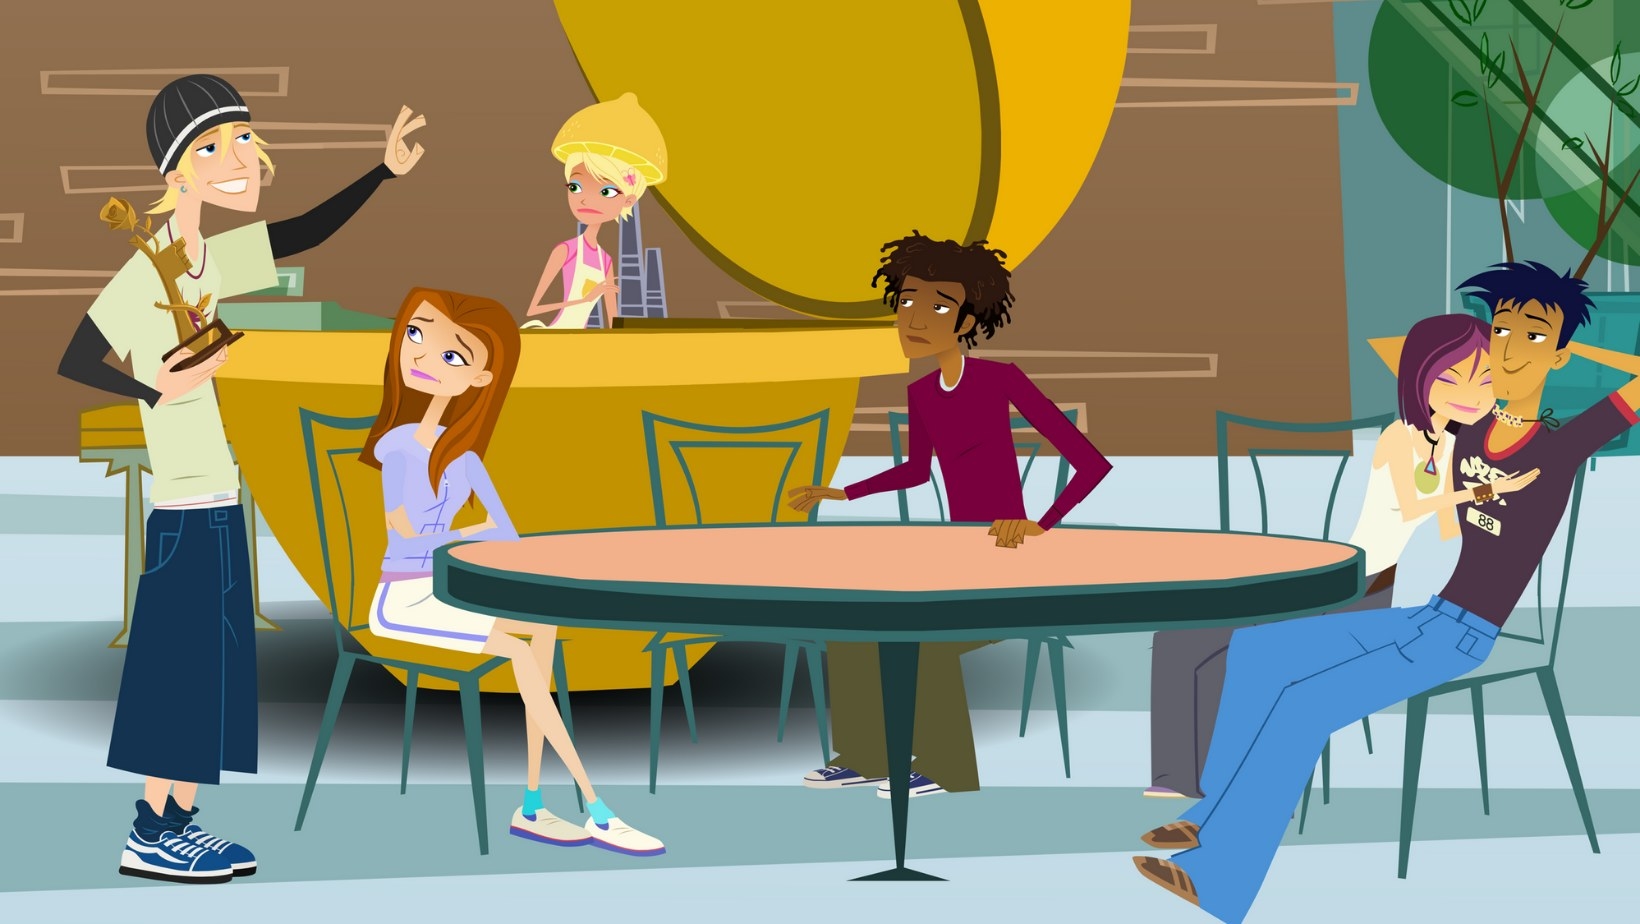 Jude, Caitlin, Wyatt, Nikki, and Jonesy sit and stand around a table at the mall as Jen works at a lemonade stand in the back